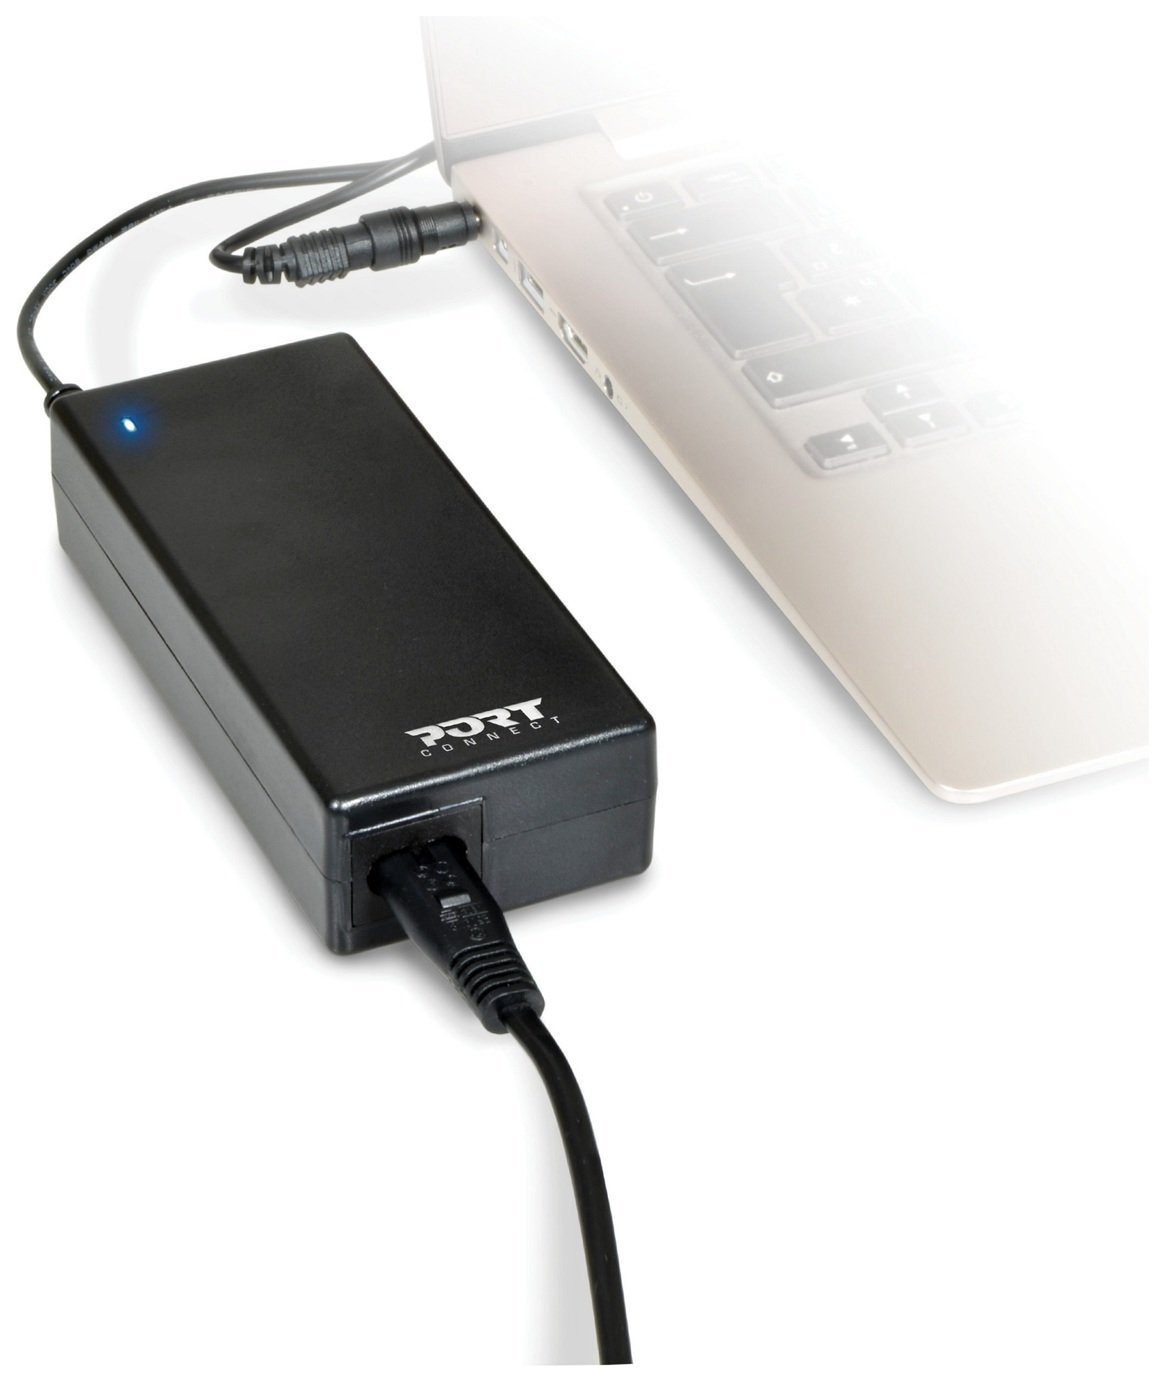 Port Connect Universal 90W Laptop Power Supply Review